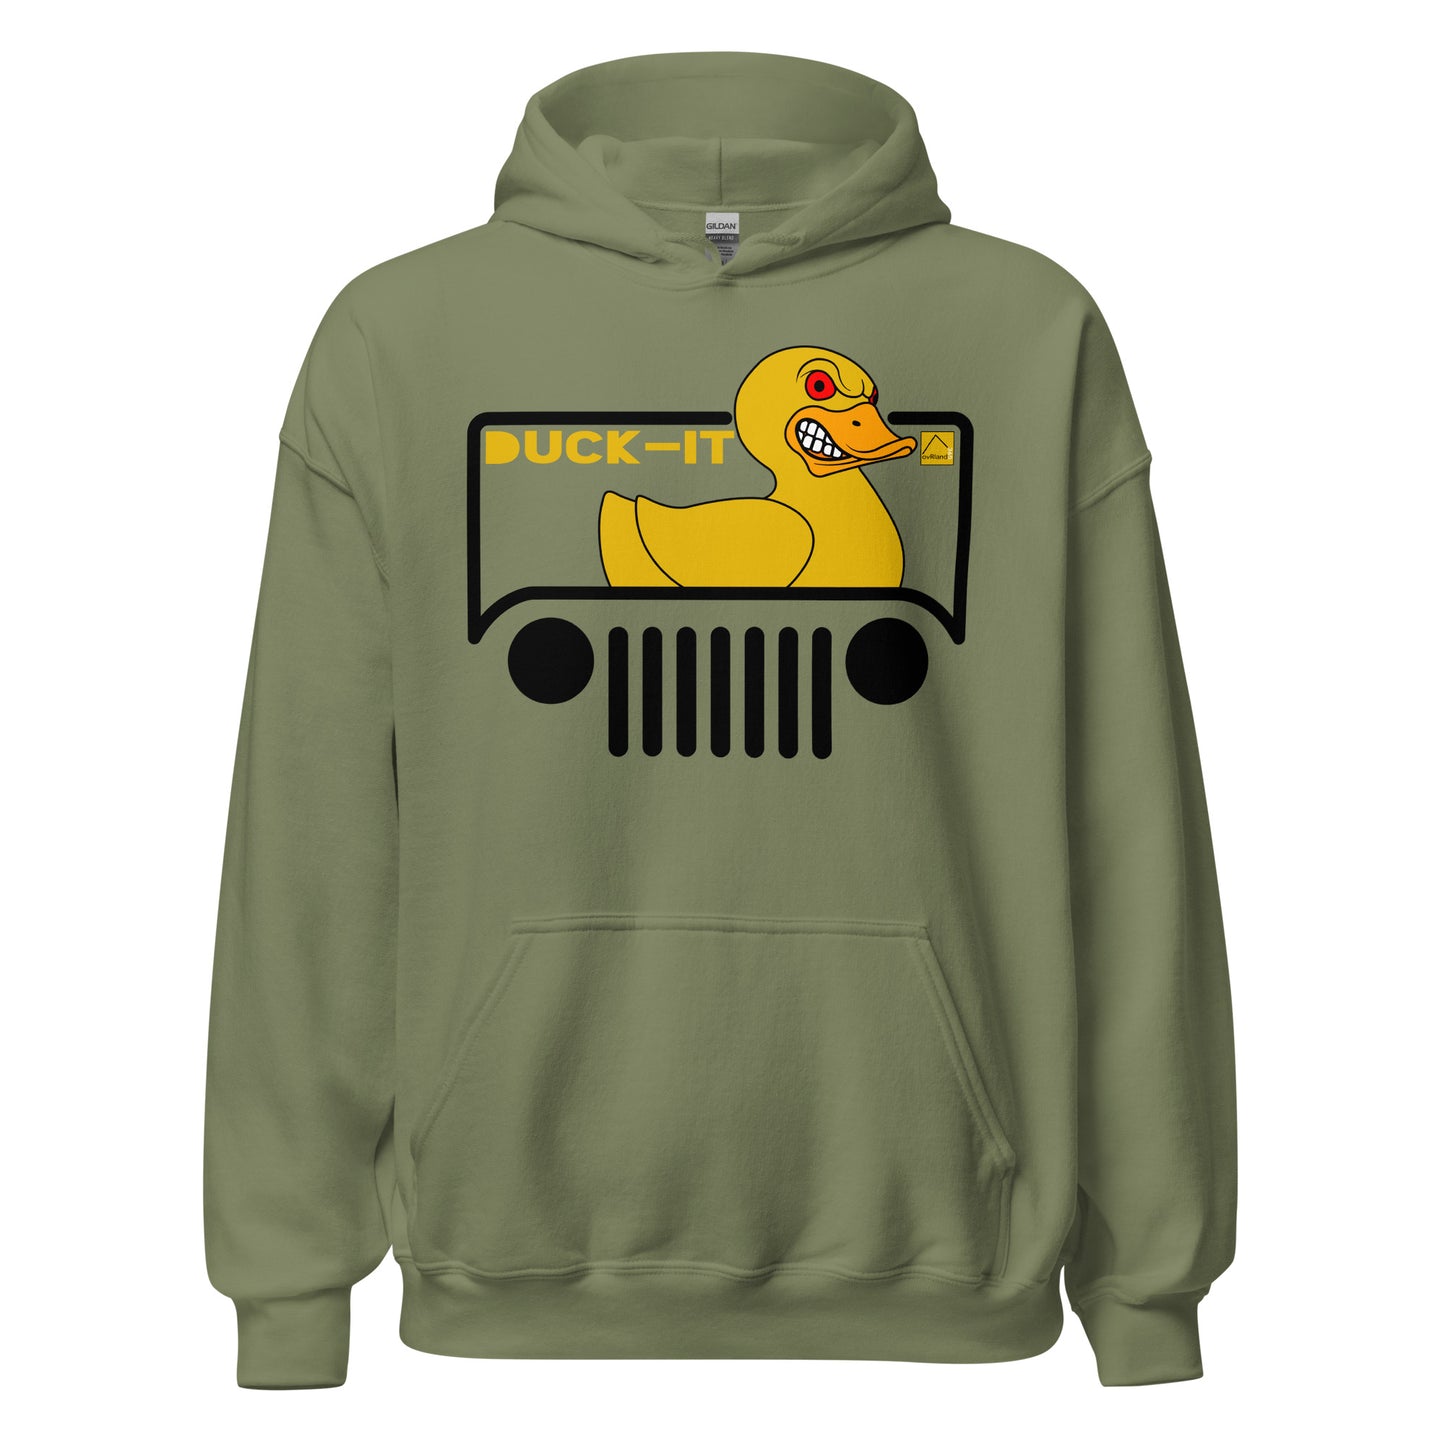 Jeep Green angry duck DUCK-IT hoodie. overland365.com